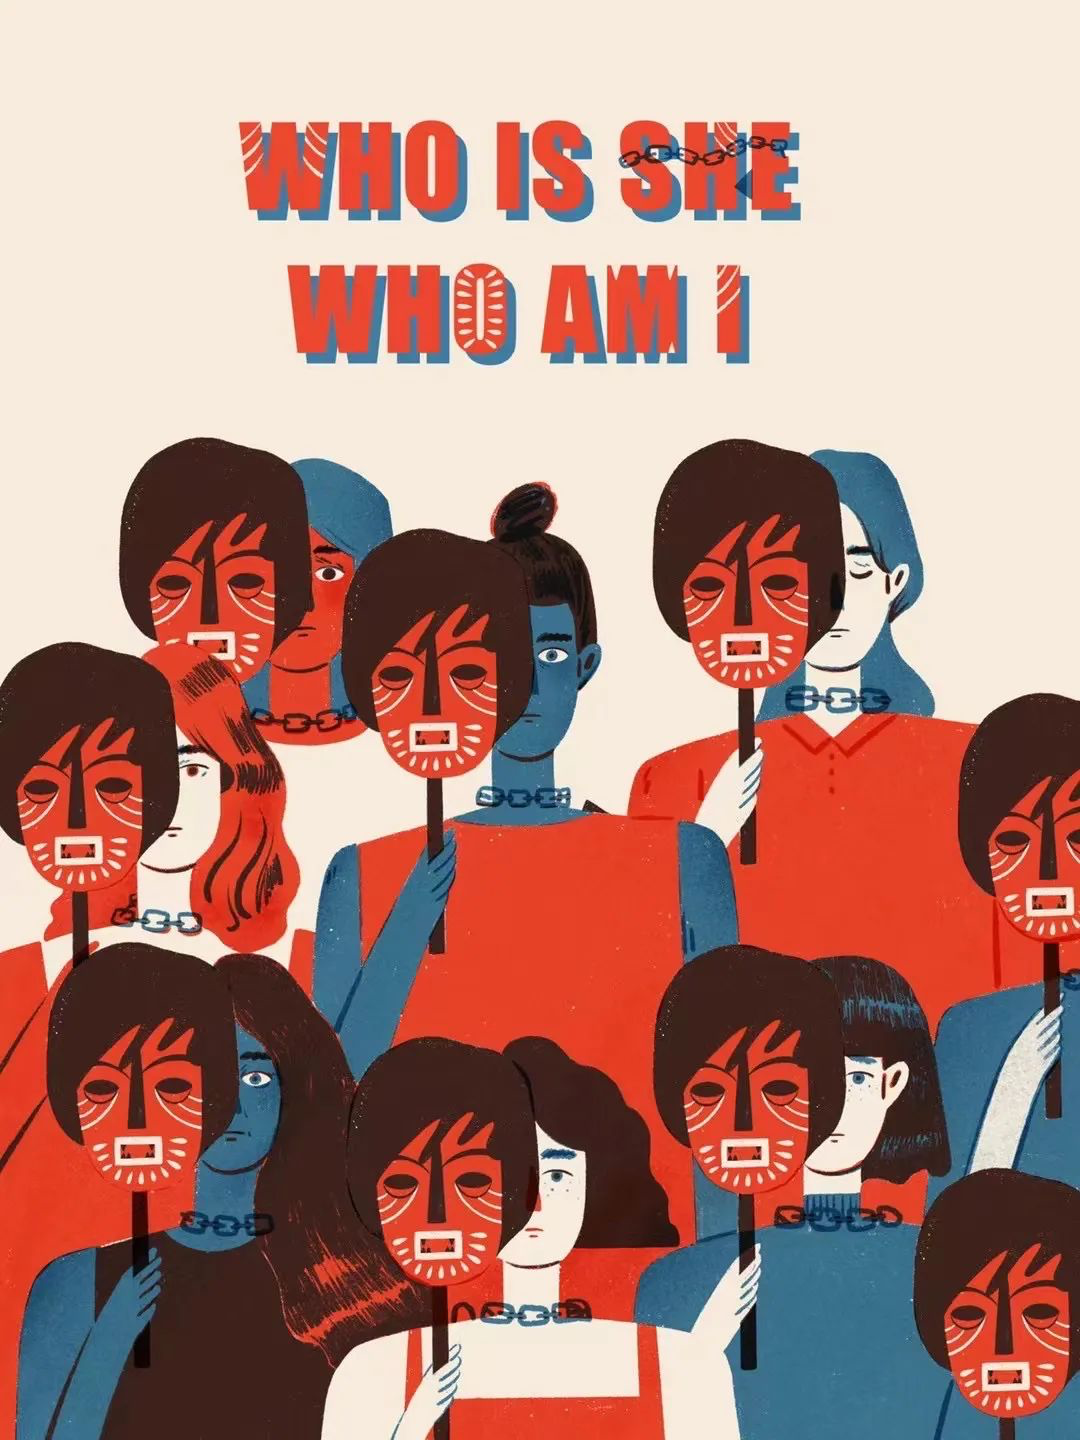 Red, blue and tan illustration of a crowd of women with chains around their necks, holding up red masks of the shackled woman’s face. At the top are the English words: “Who is She, Who Am I?”